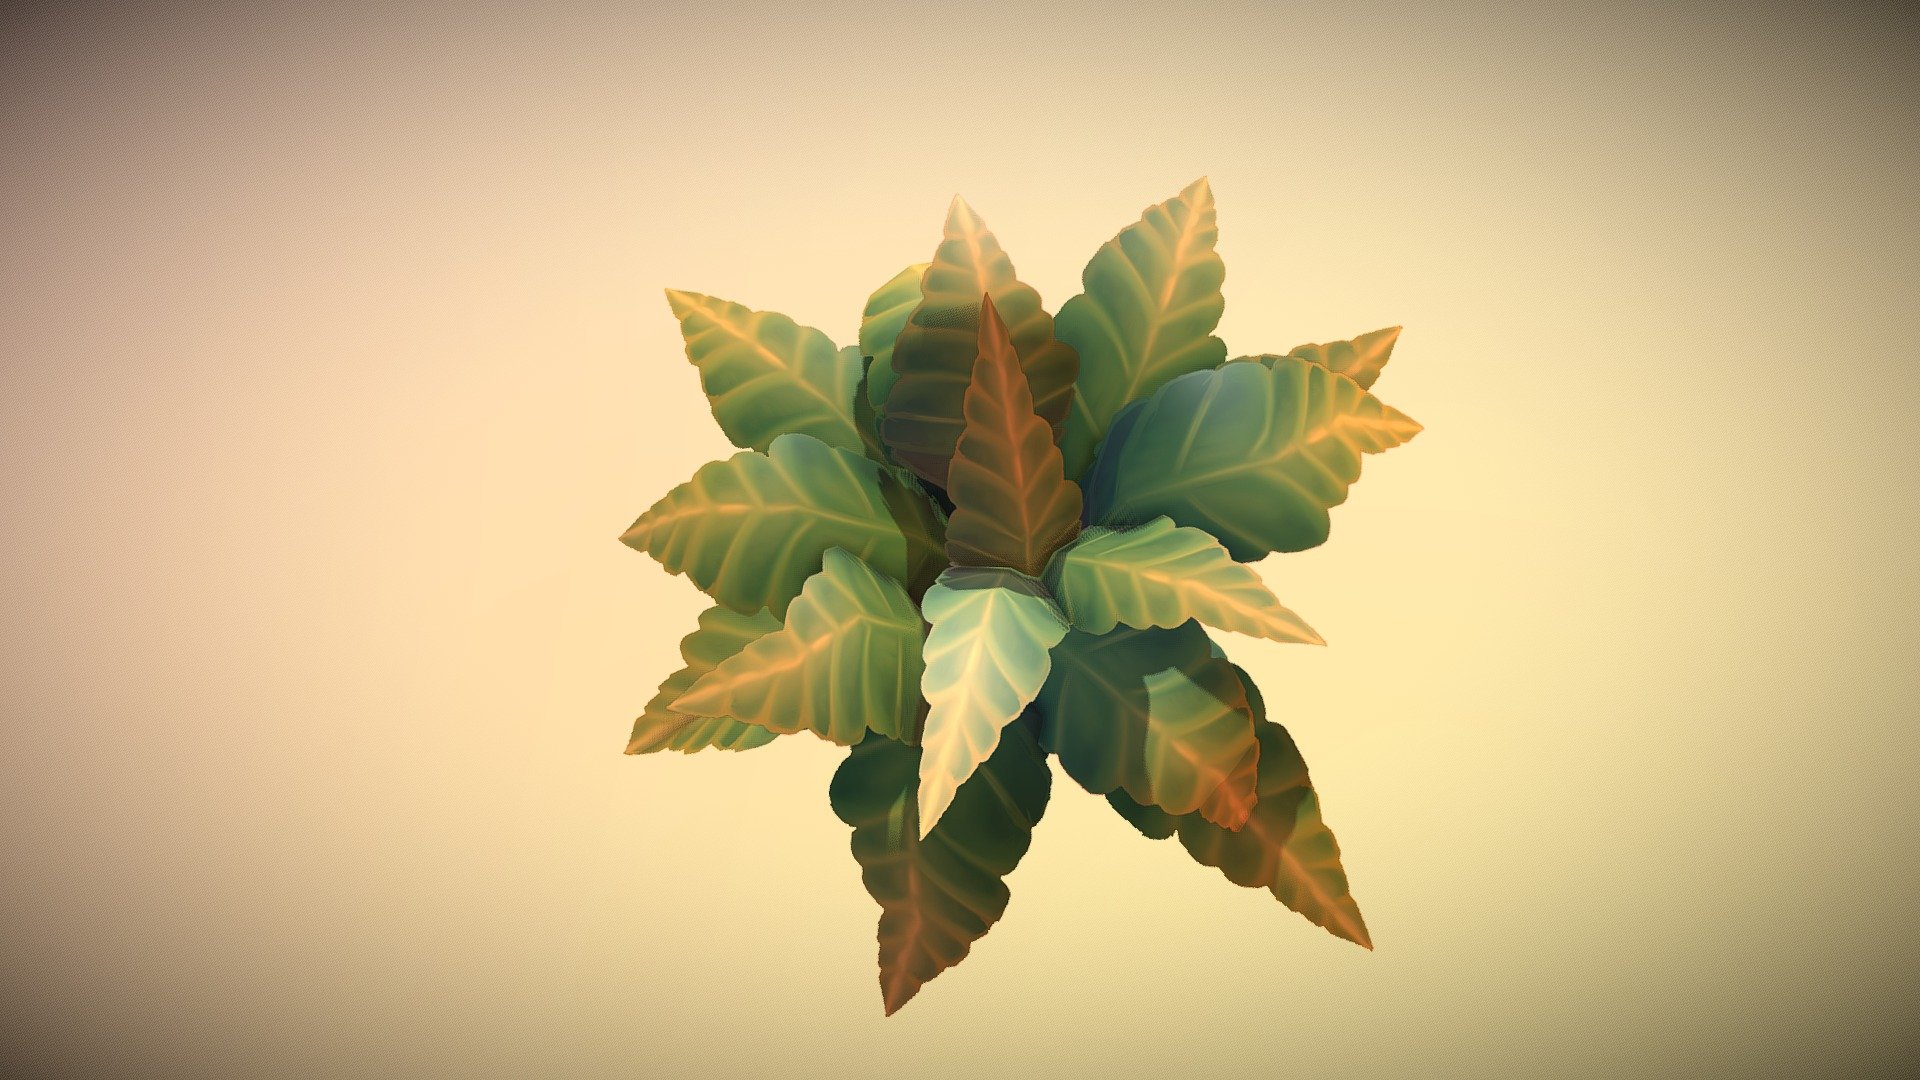 Fern Low Poly 
Hand painted Texture - Fern Low Poly 01 - 3D model by Marina H (@Darrkarra) 3d model